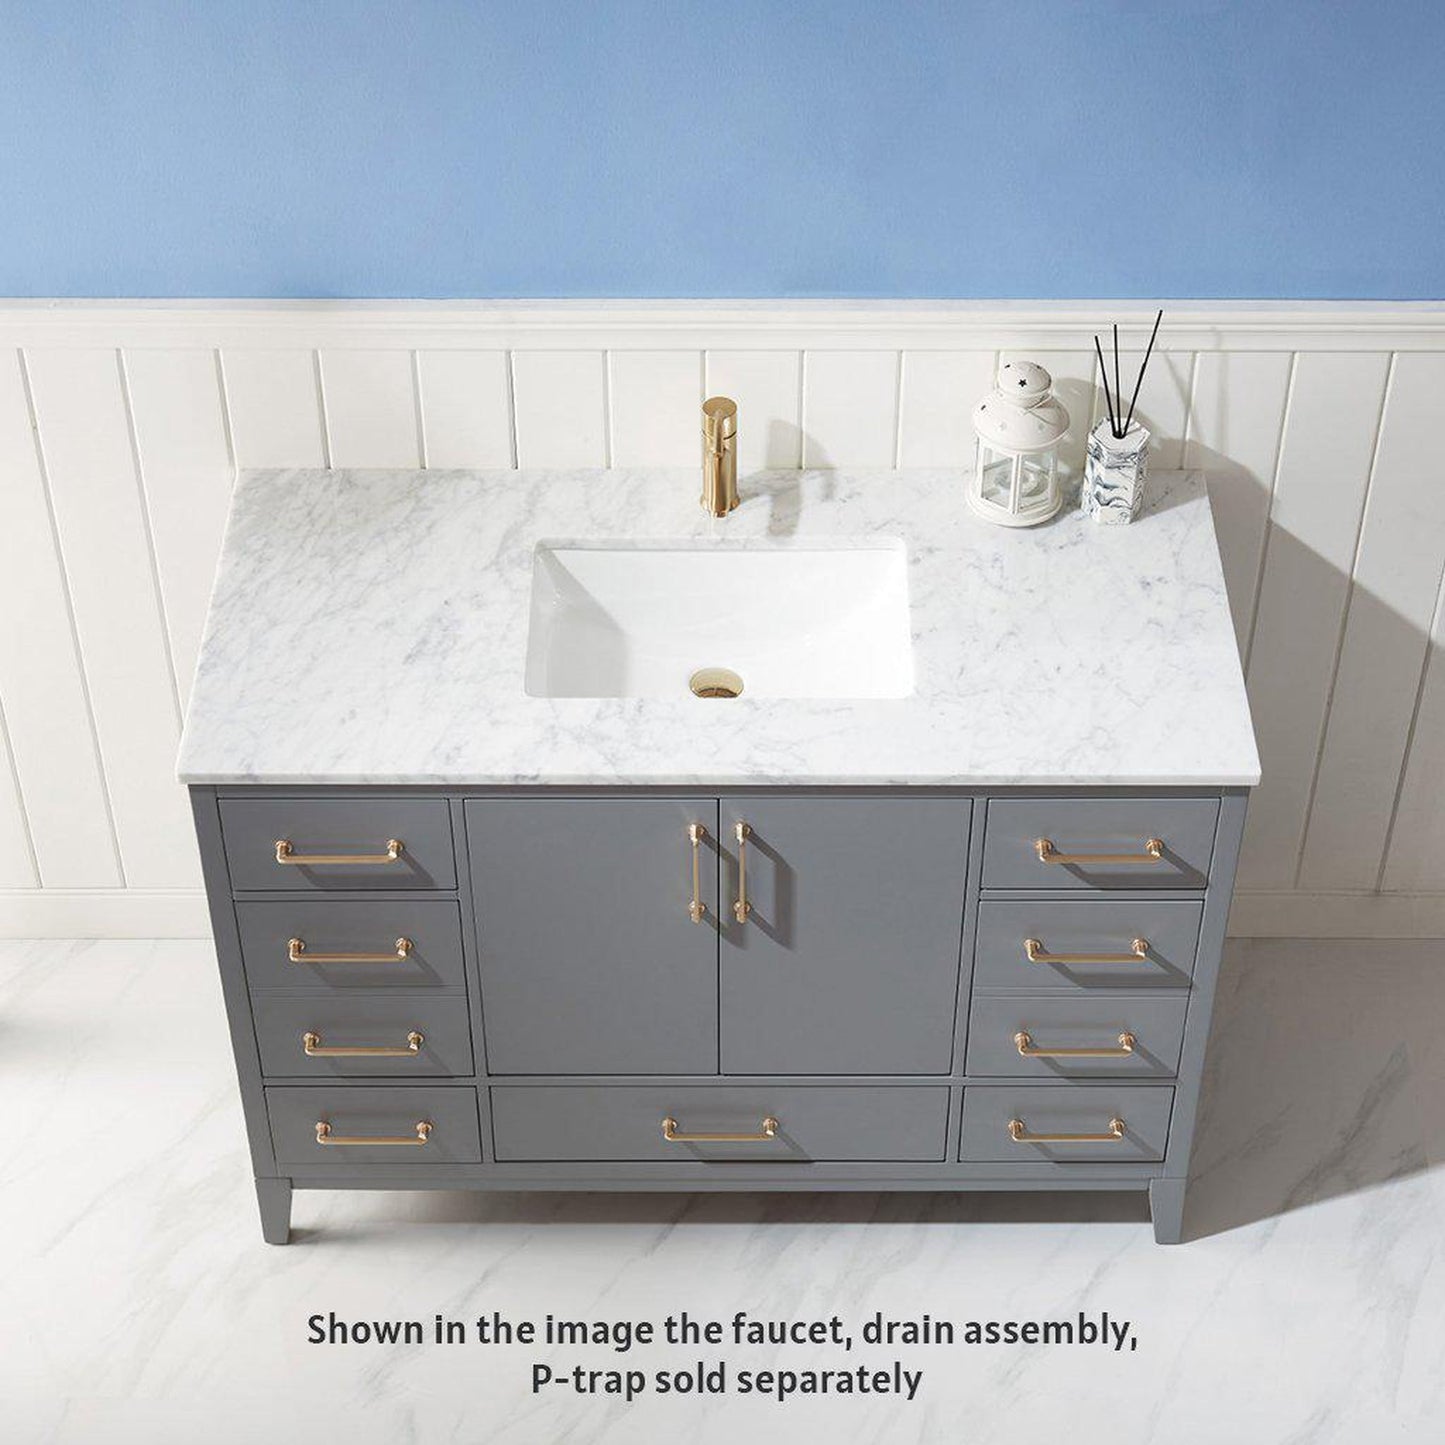 Altair Sutton 48" Single Gray Freestanding Bathroom Vanity Set With Natural Carrara White Marble Rectangular Undermount Ceramic Sink, and Overflow